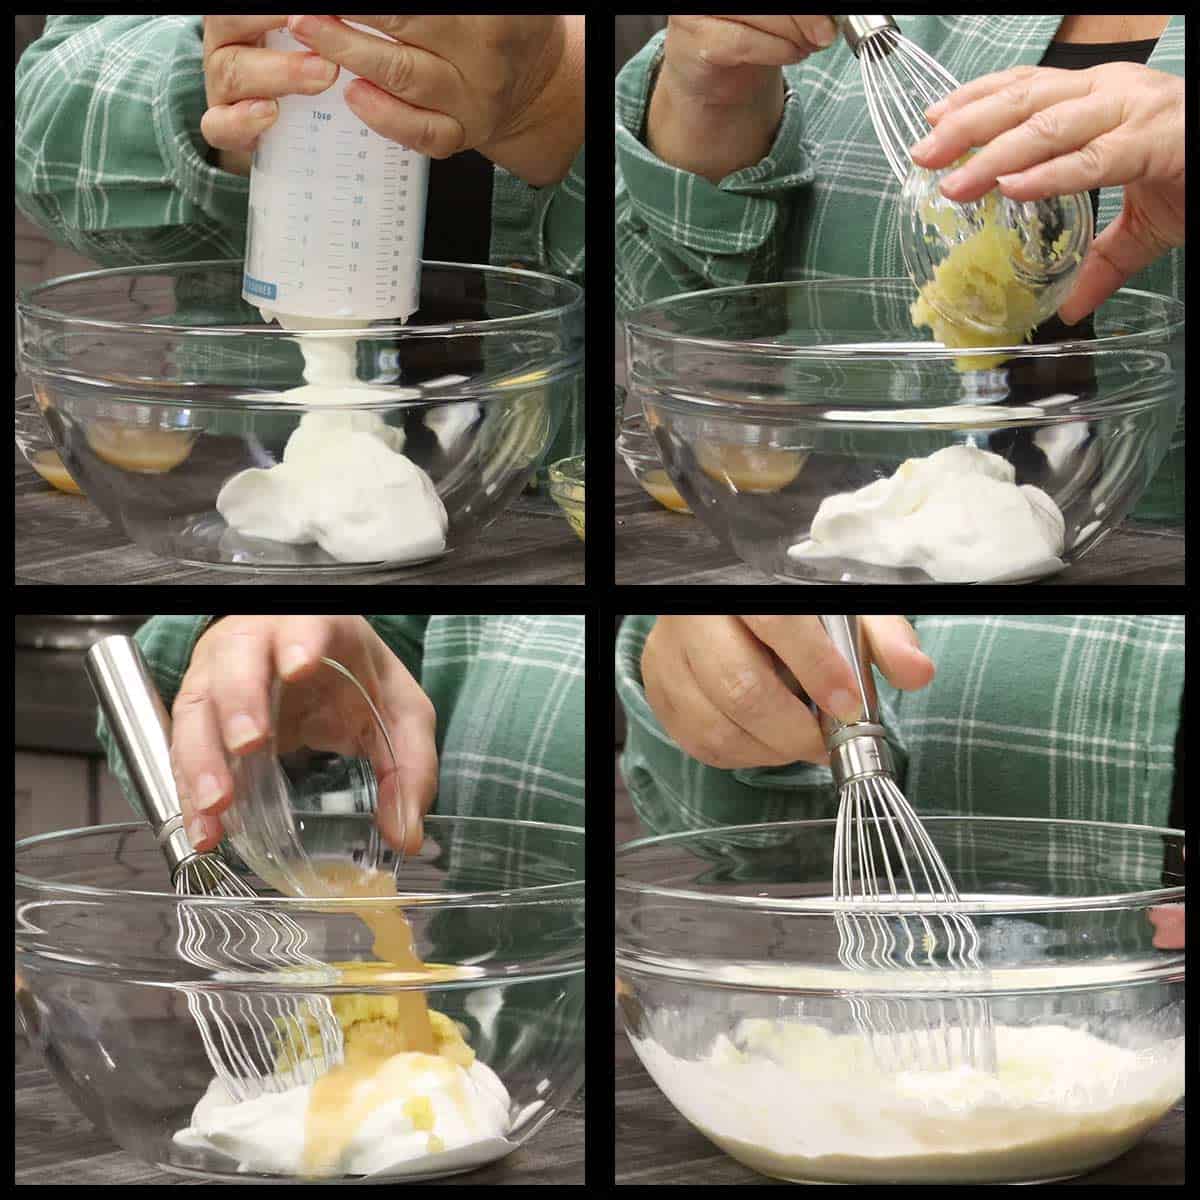 Mixing wet ingredients in a mixing bowl for marinade.